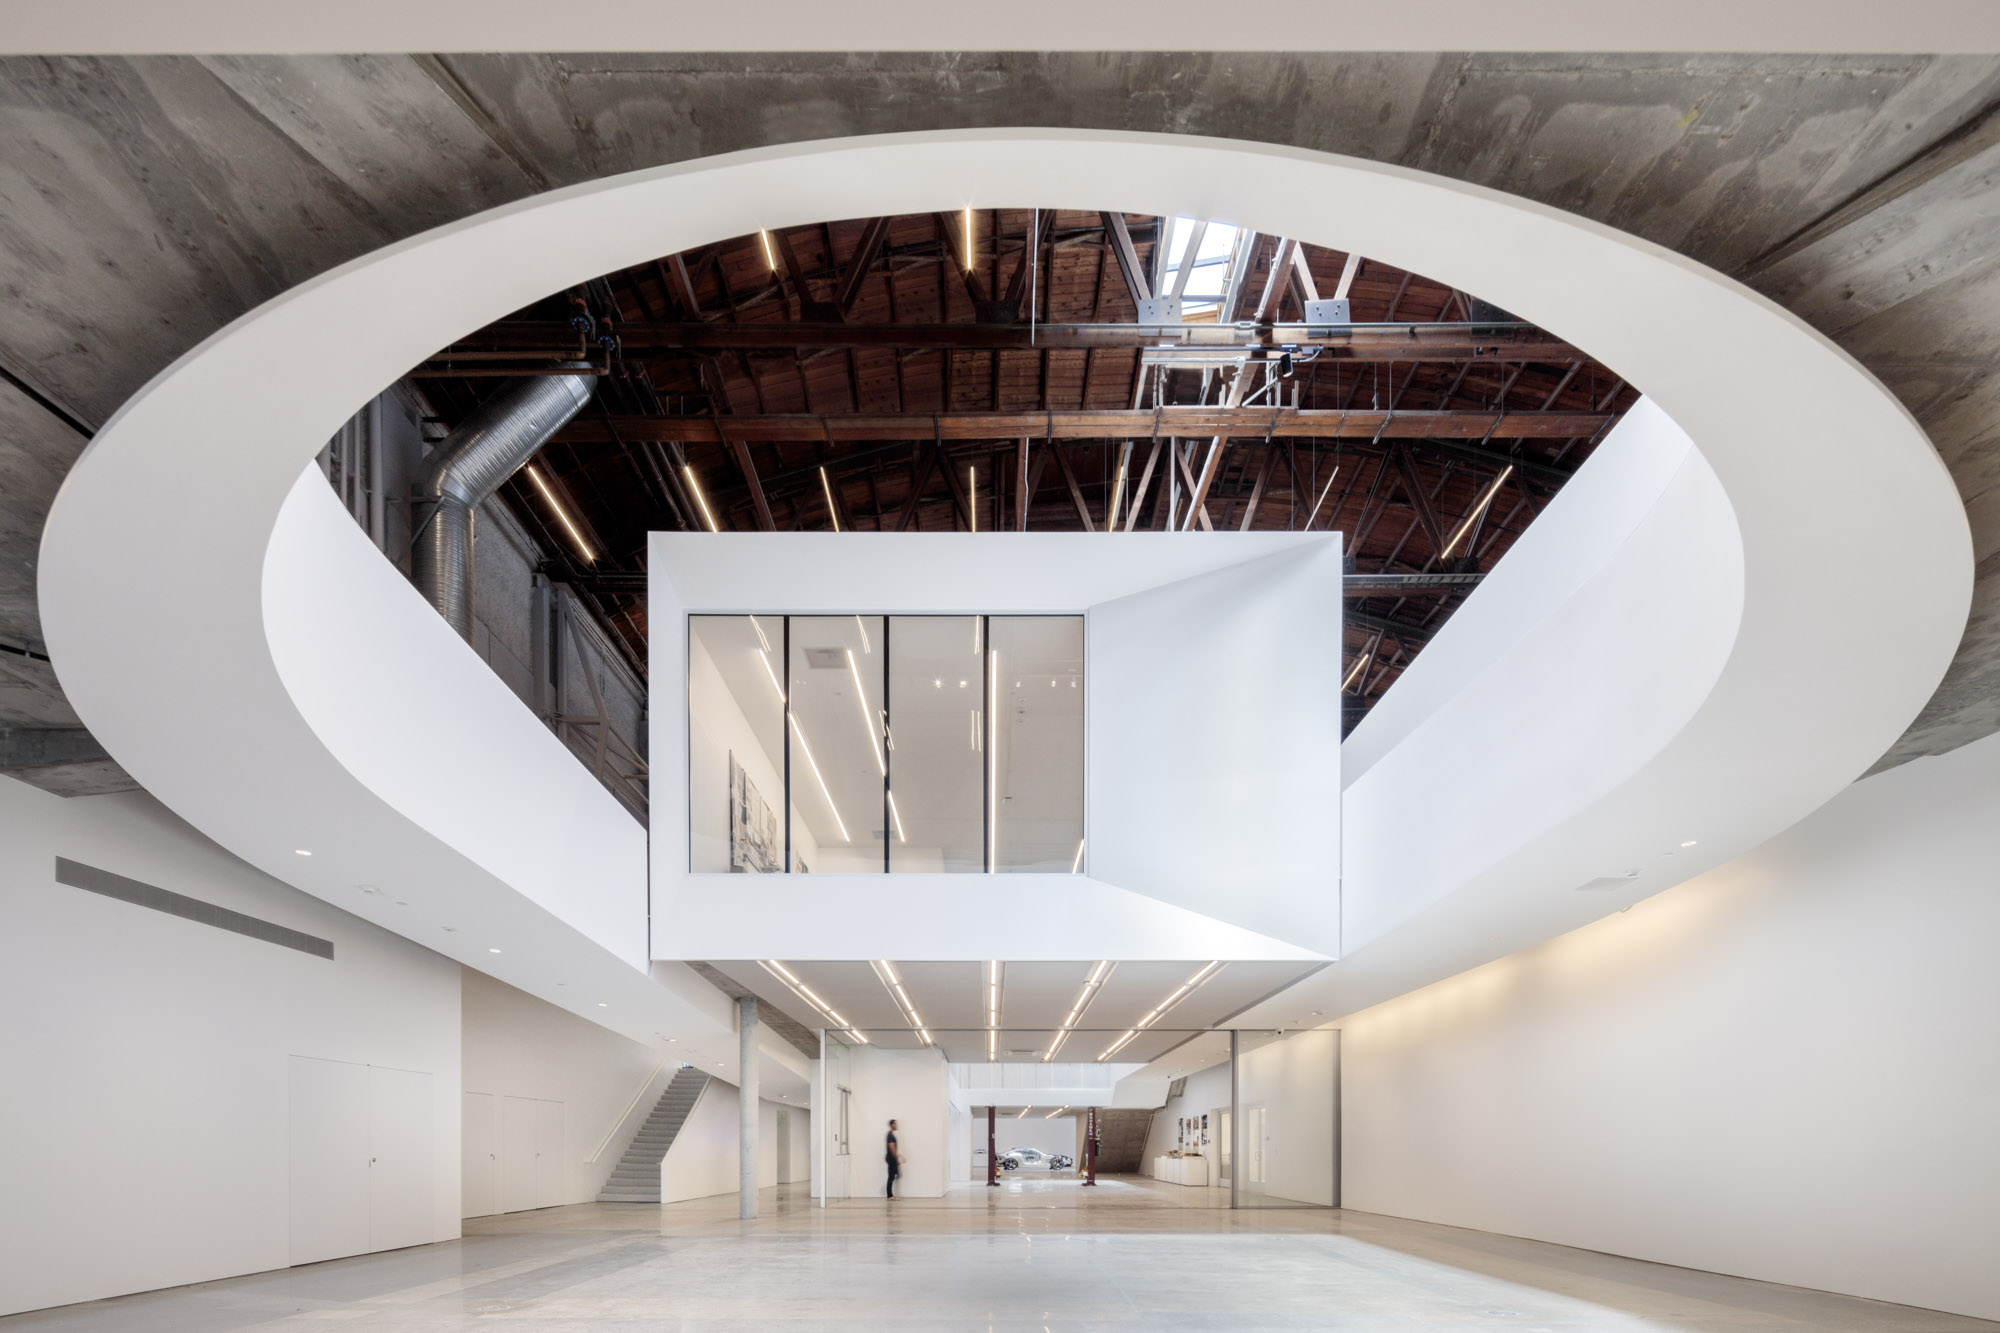 A former supersonic wind tunnel becomes a new educational facility for transportation design